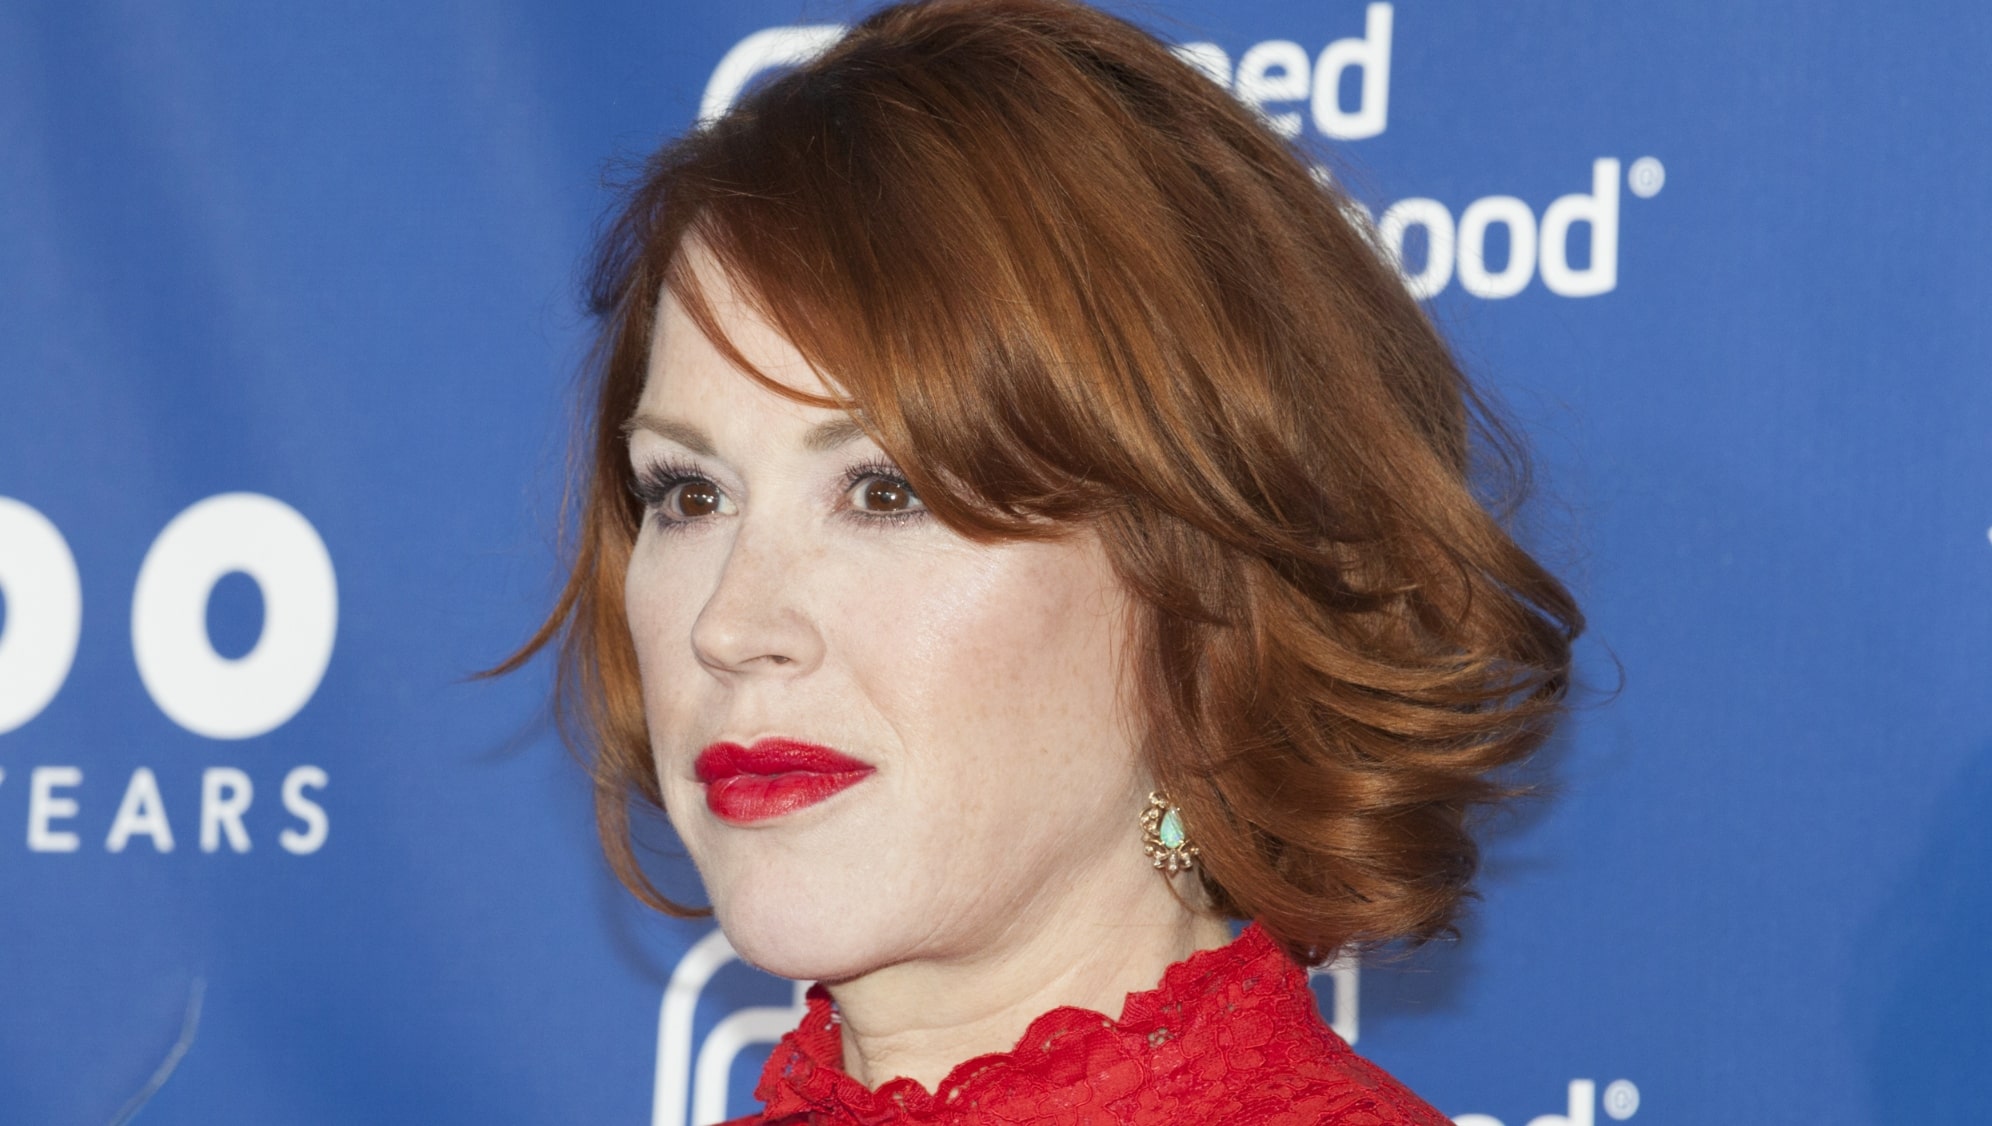 Molly Ringwald admits her mother was ‘a little mortified’ when she realized she forgot her daughter’s birthday